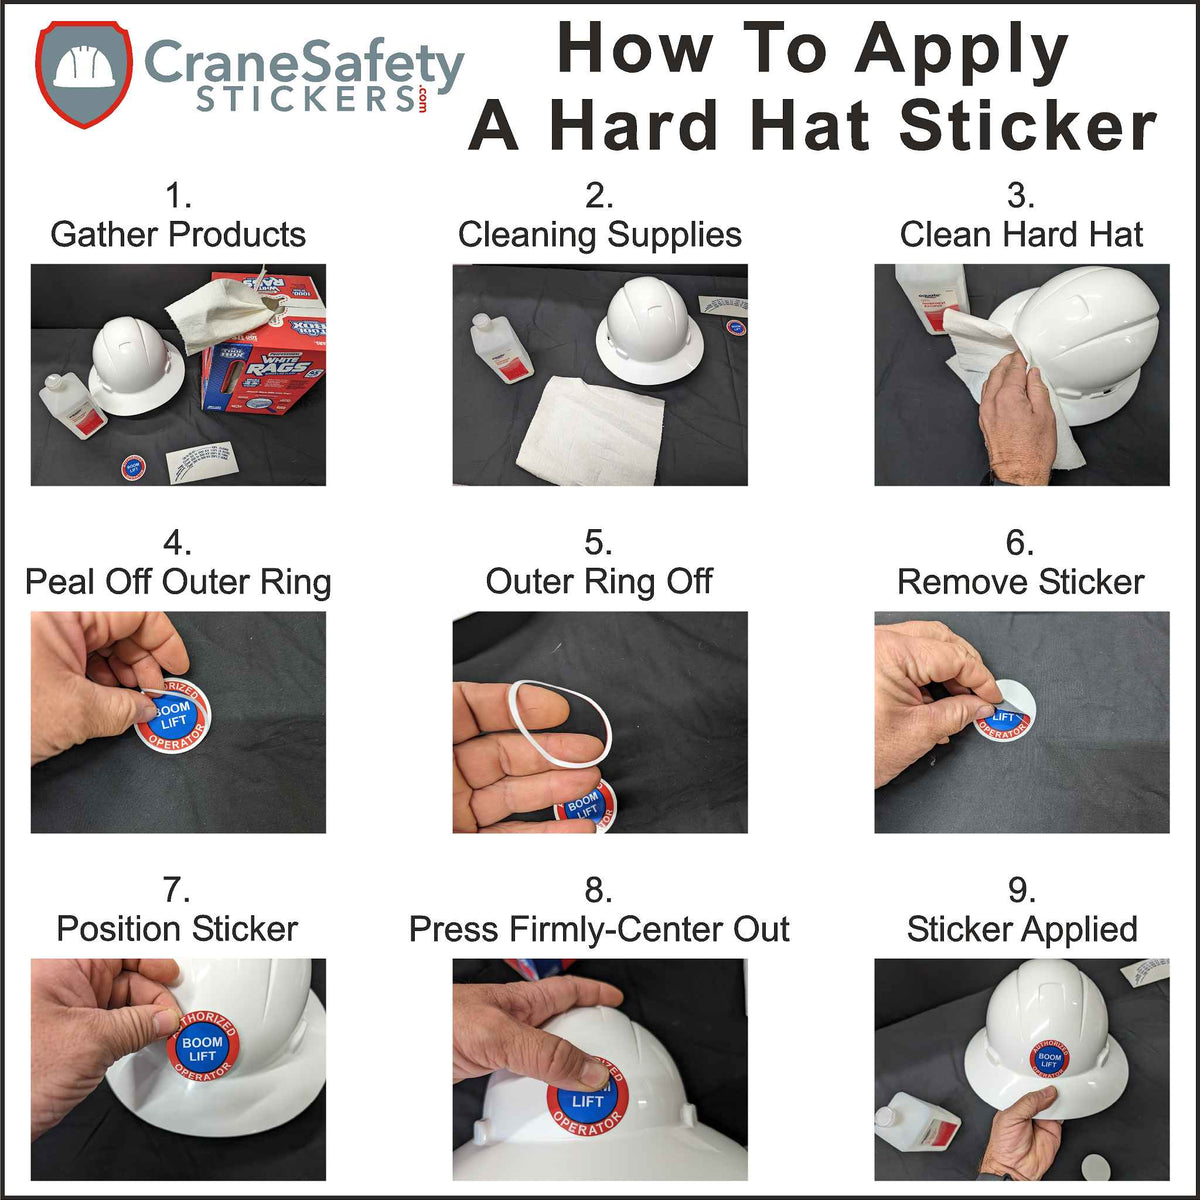 How To Apply A Emergency Management Hard Hat Sticker To a Hard Hat.